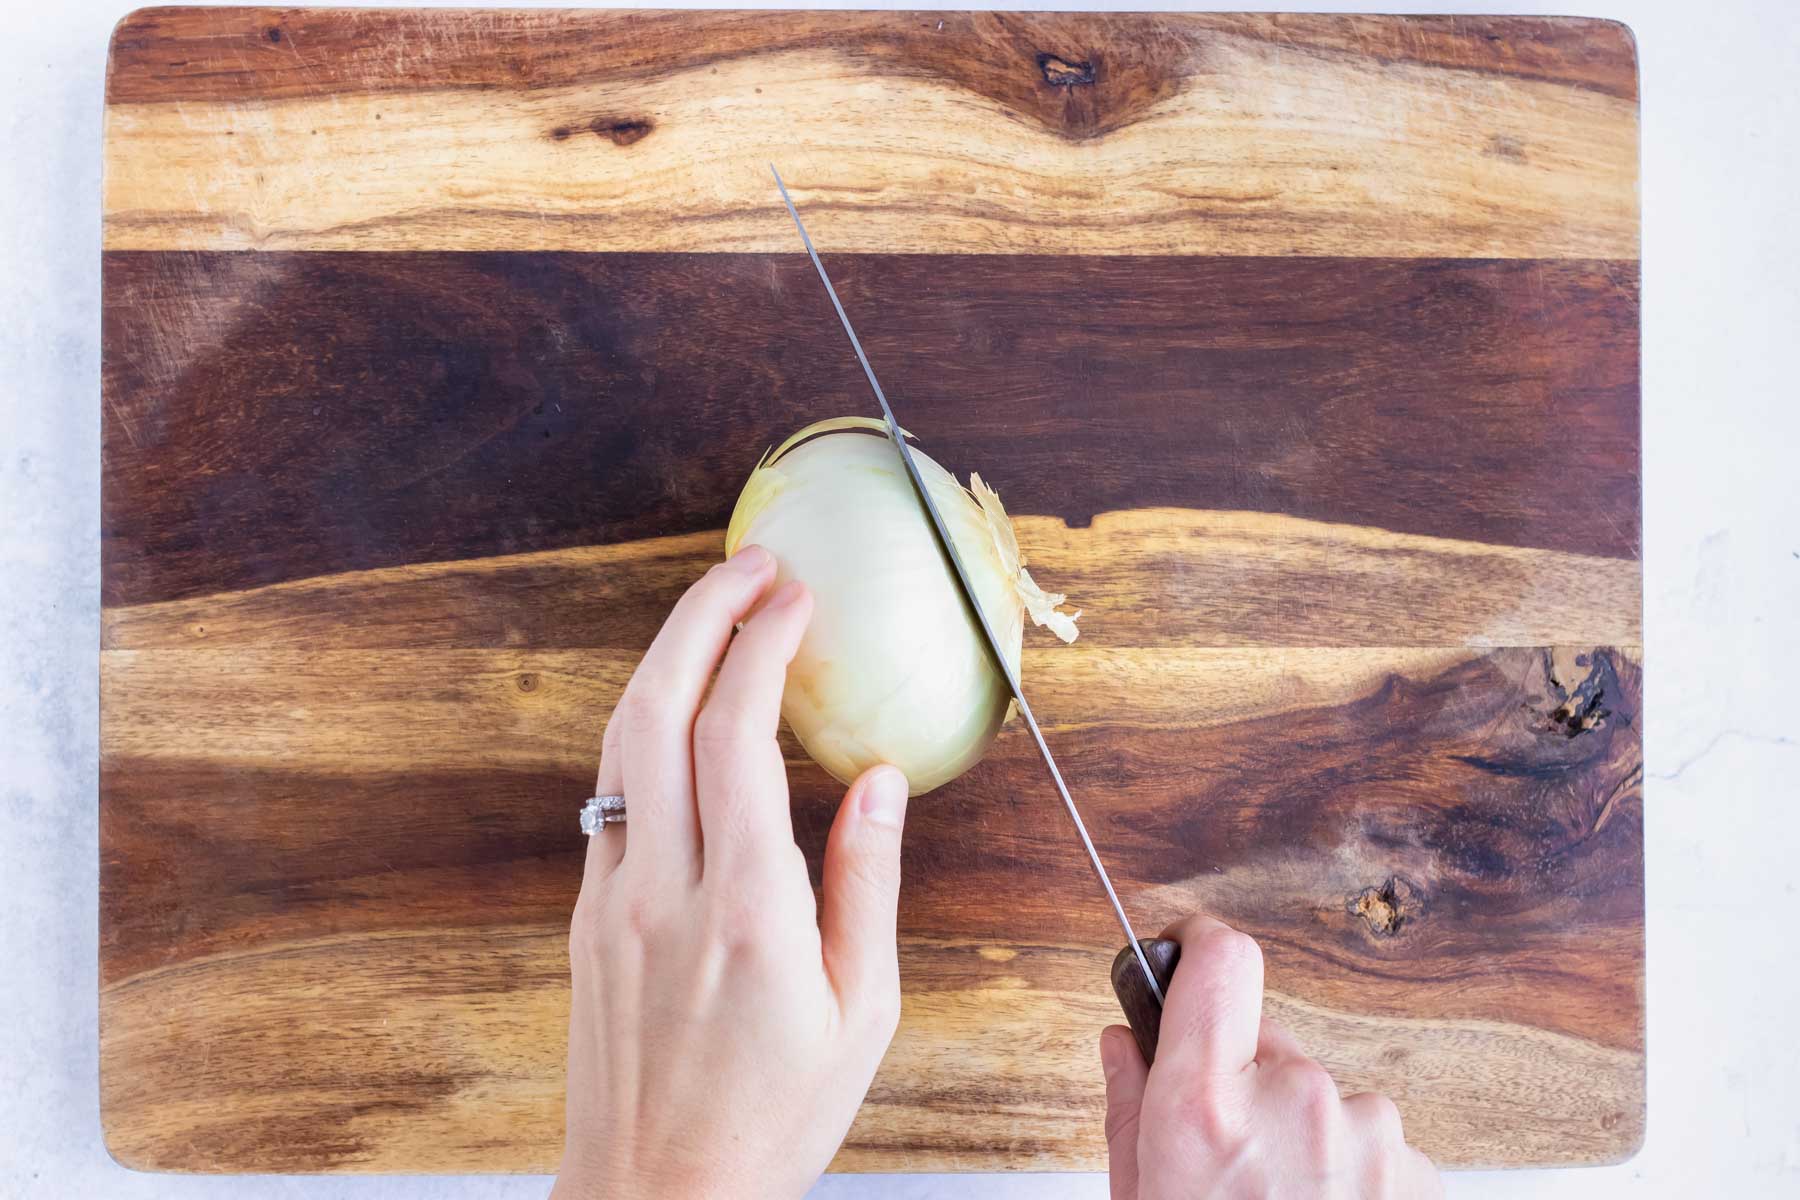 The end of an onion is removed with a knife on a cutting board.